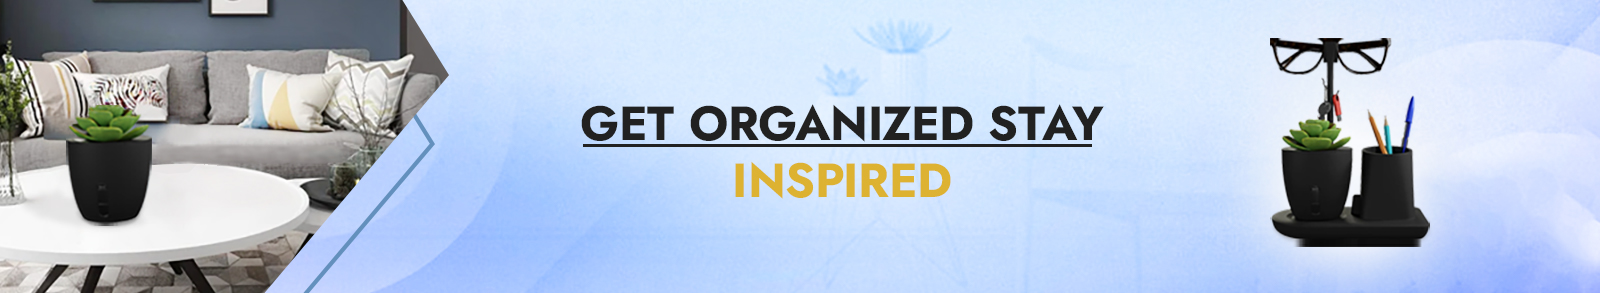 Get Organized, Stay Inspired